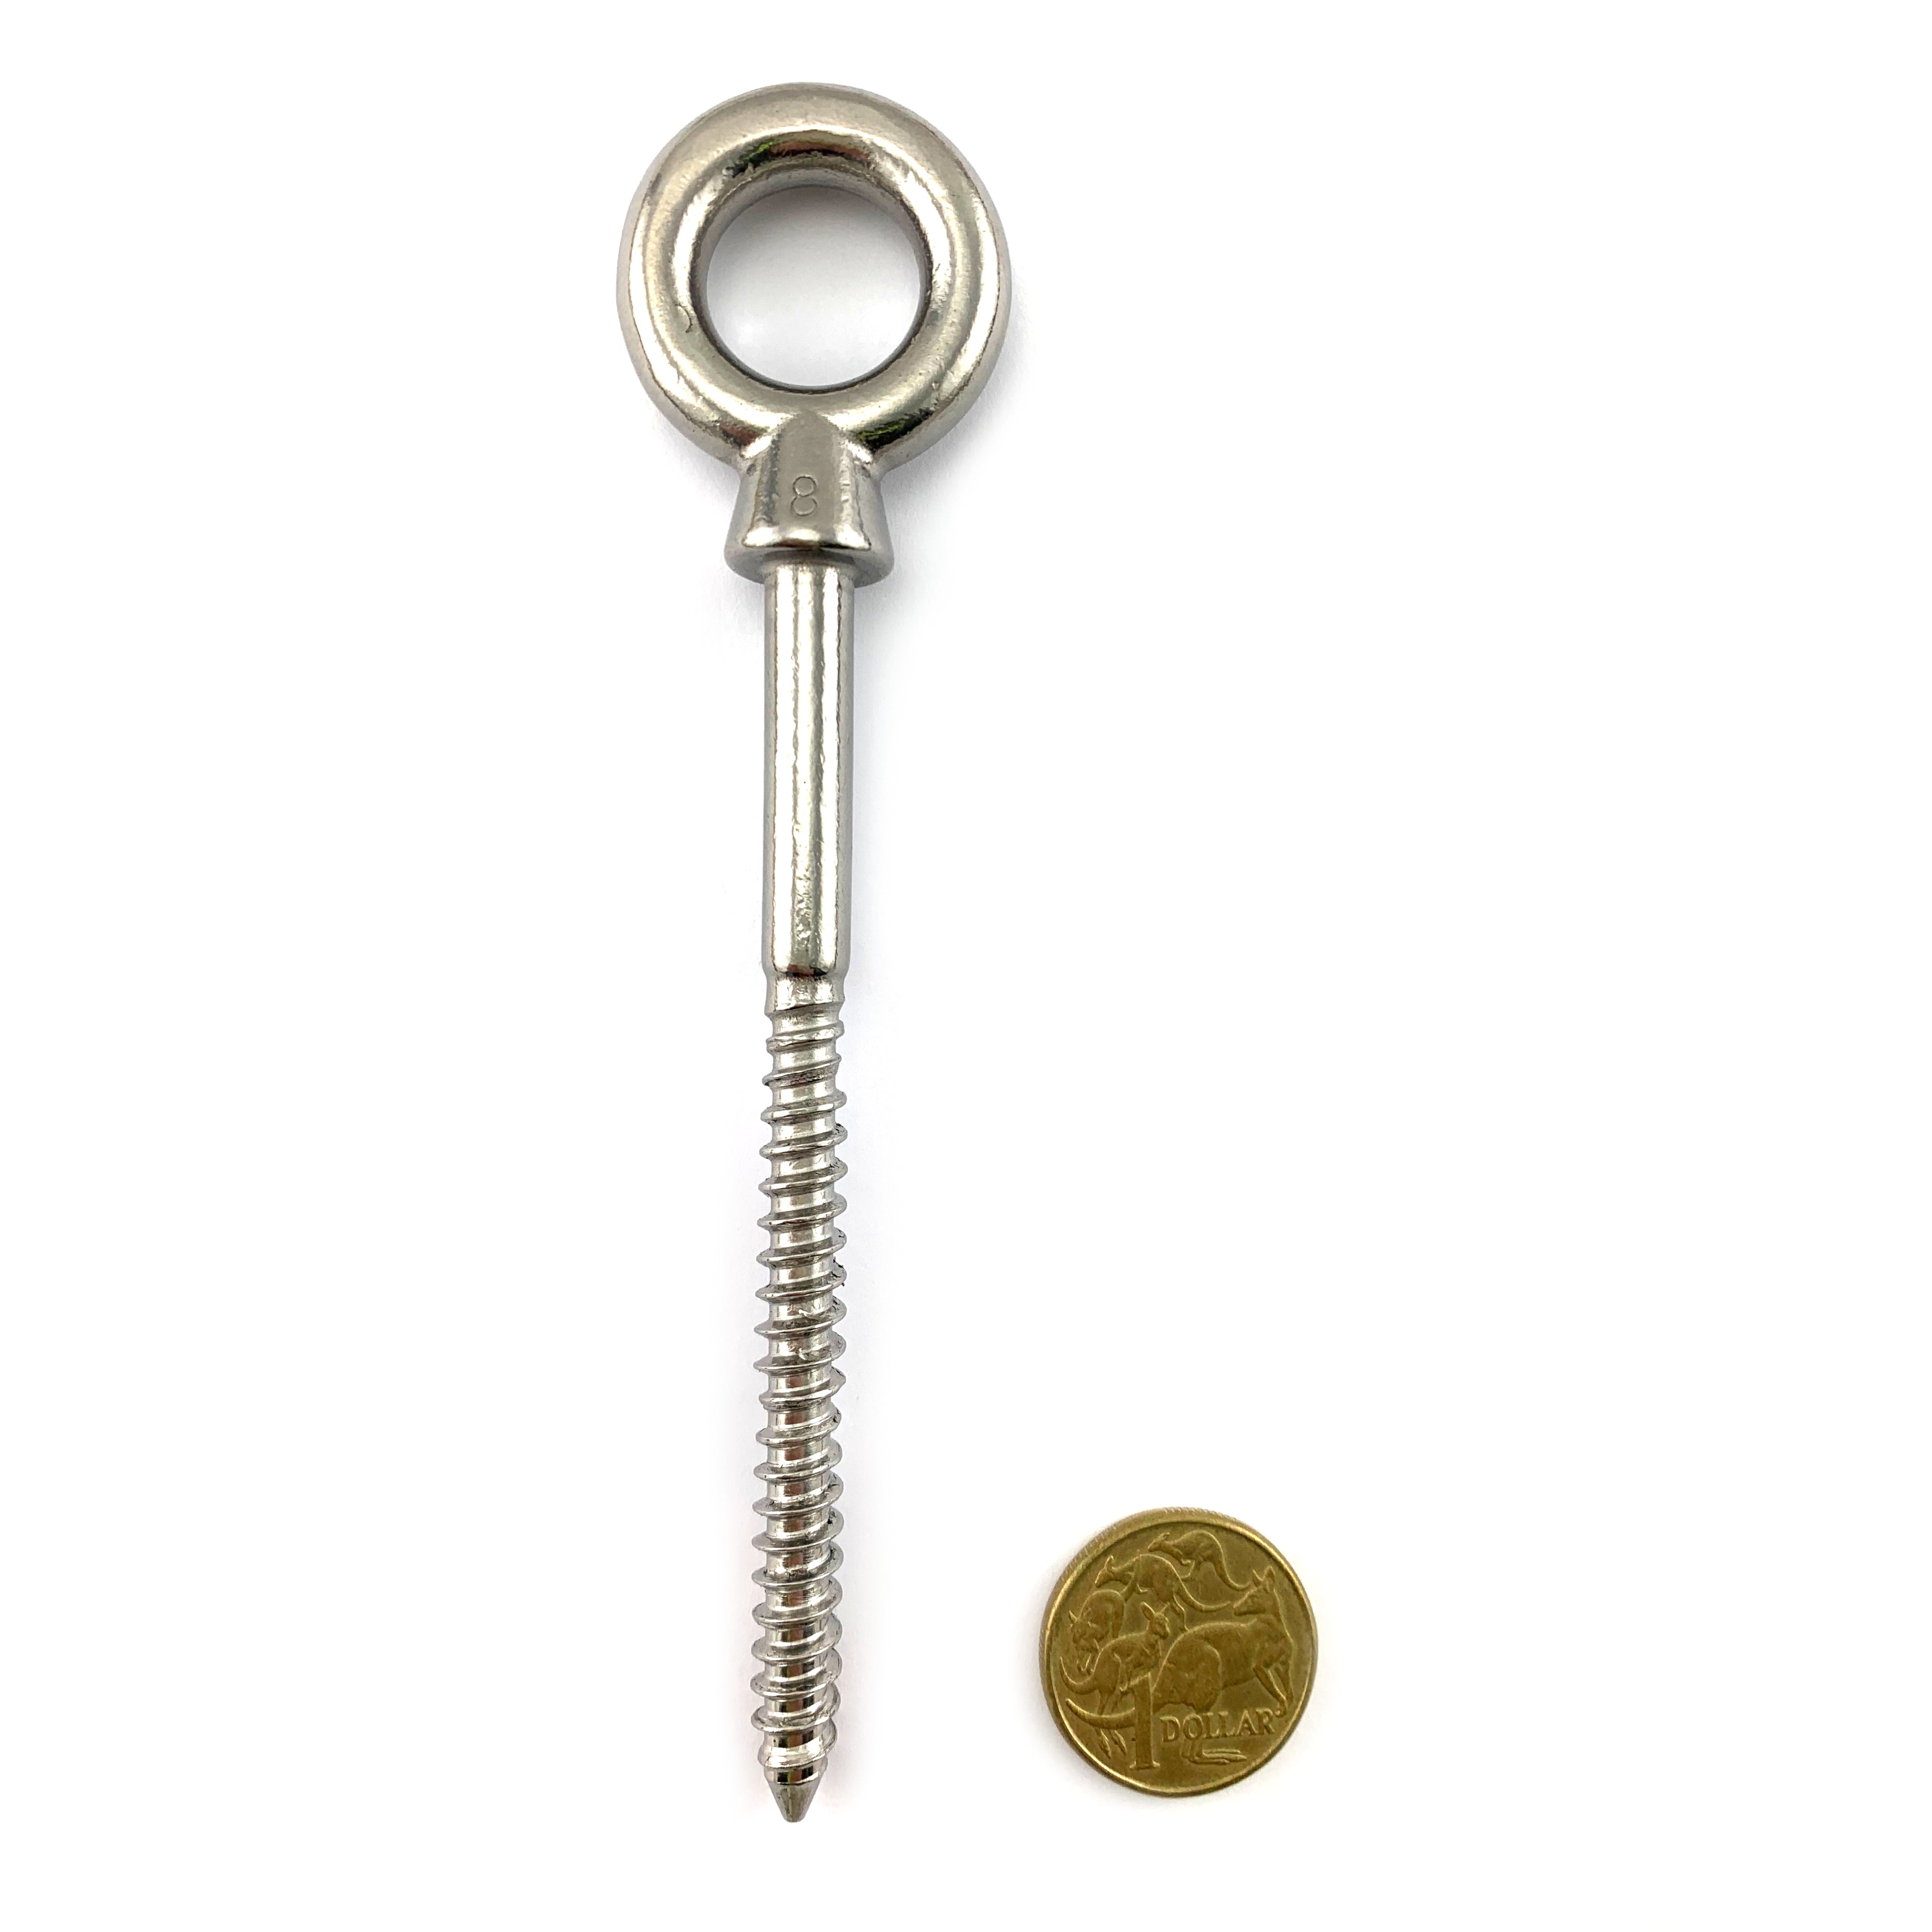 vStainless steel eye bolt, size 8mm with a 70mm timber thread. Australia.